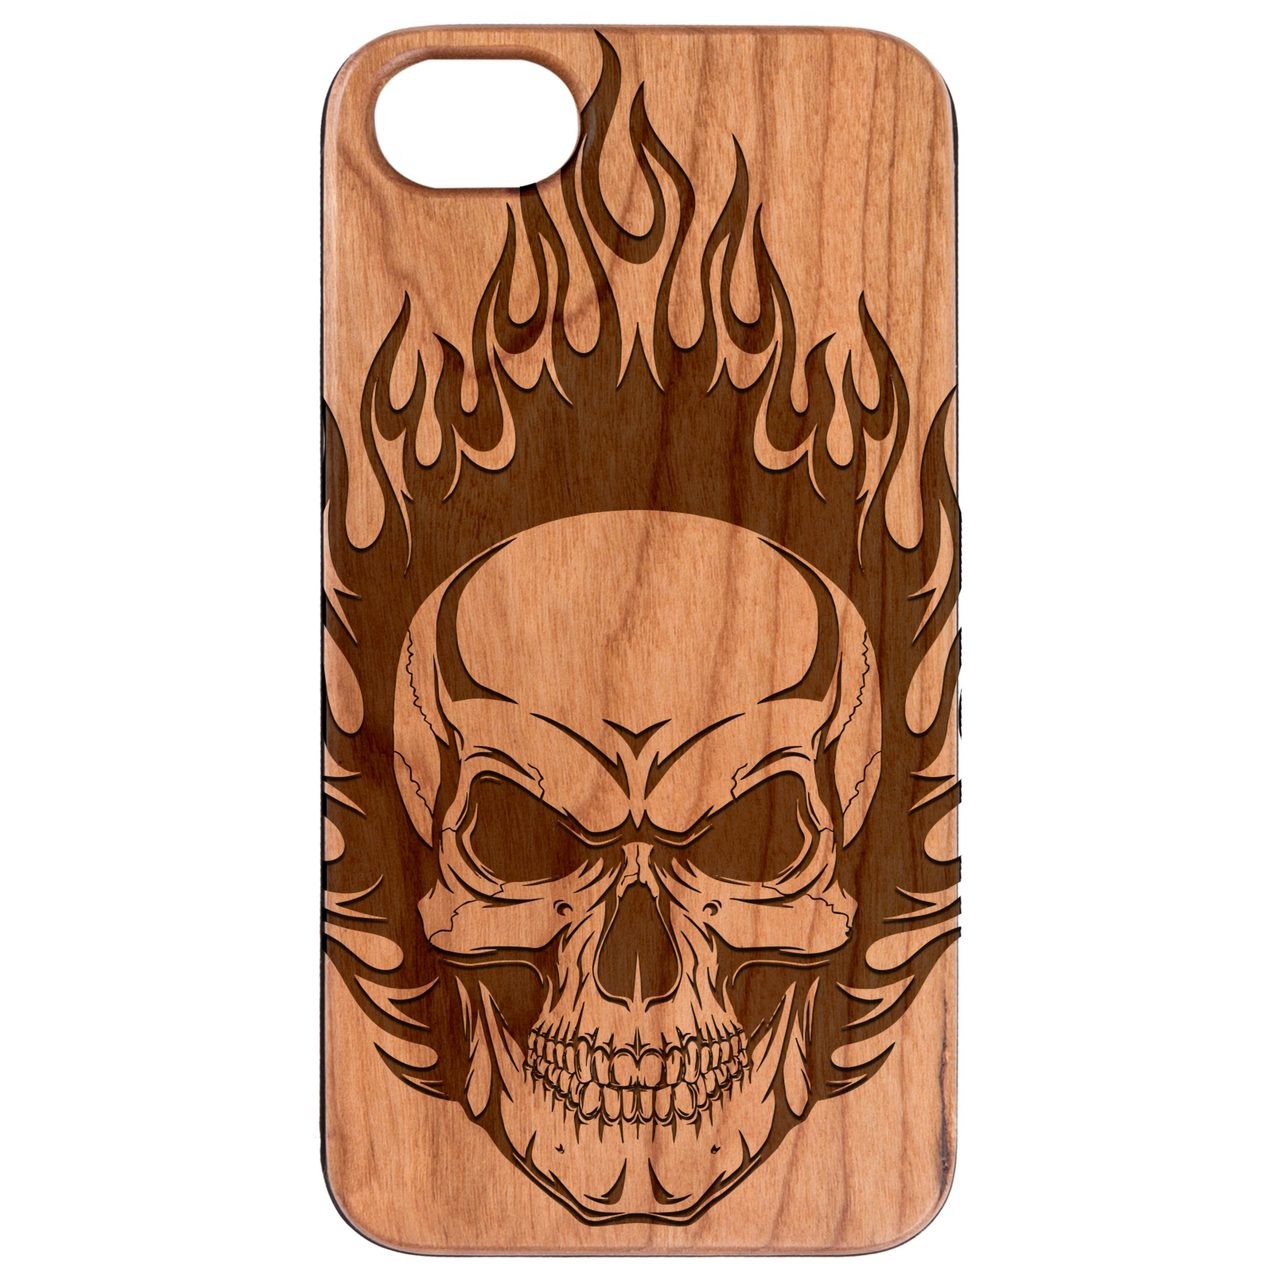  Skull on Fire - Engraved - Wooden Phone Case - IPhone 13 Models